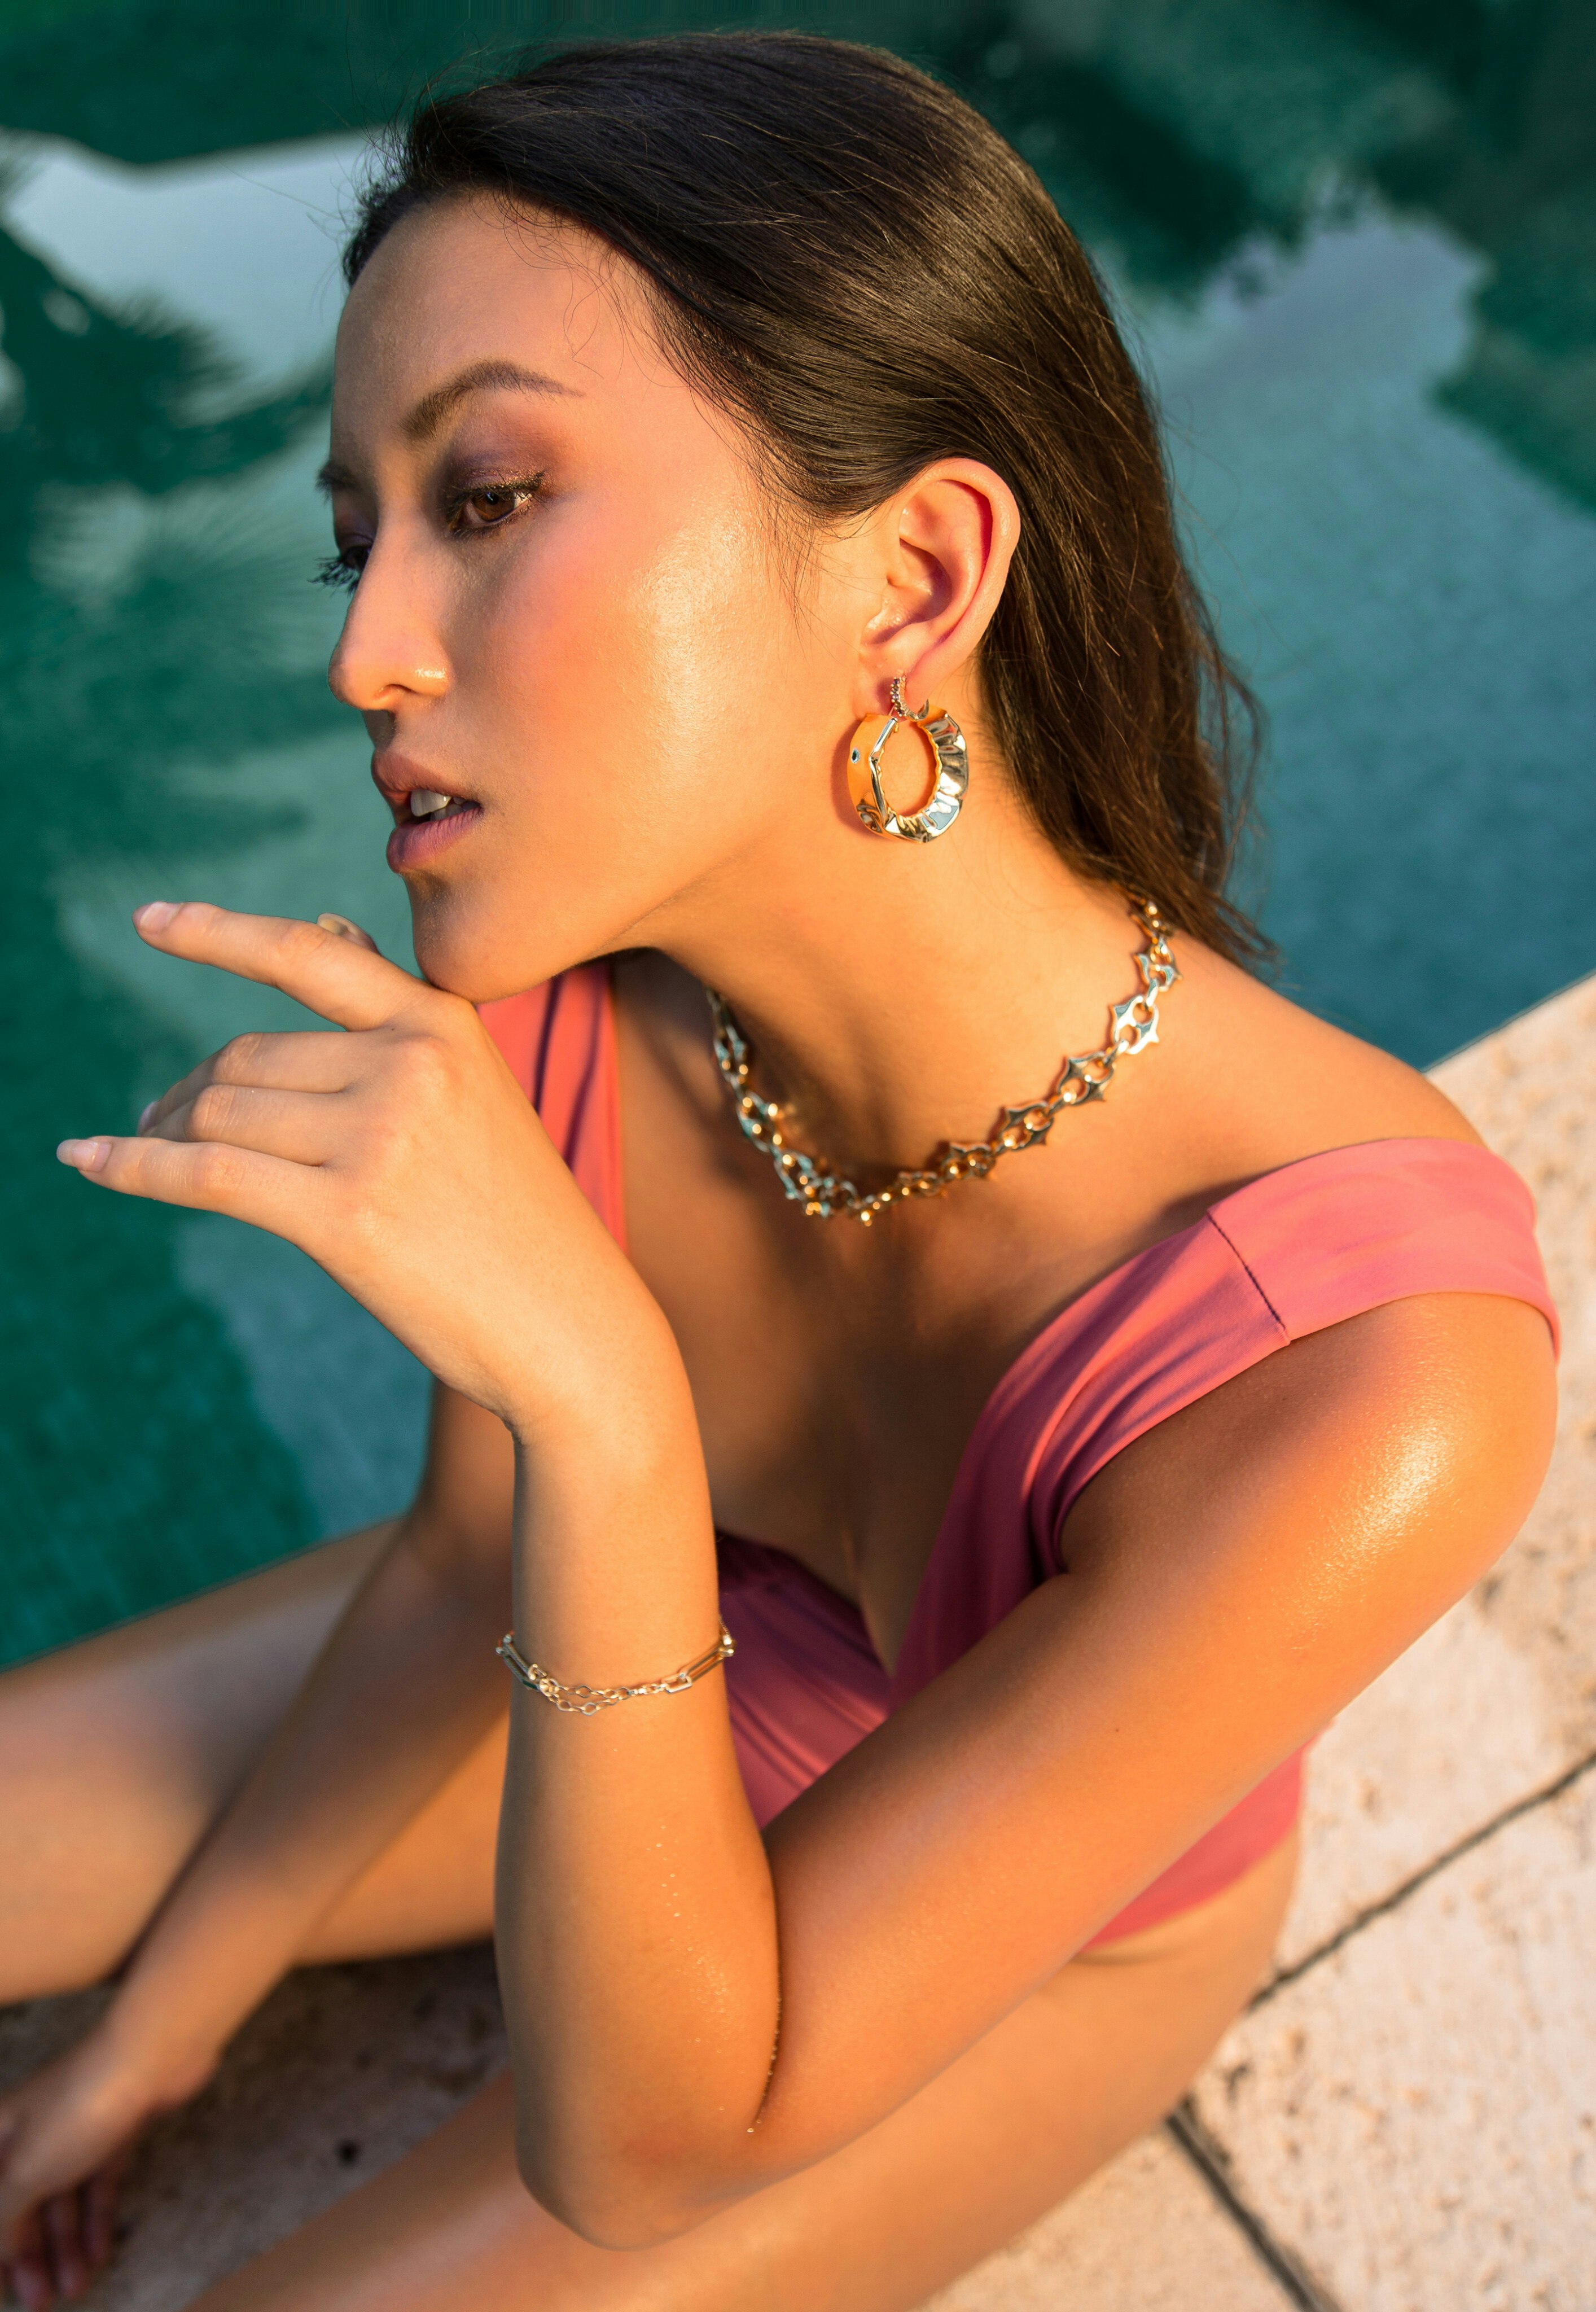 An image of Jessie Wang